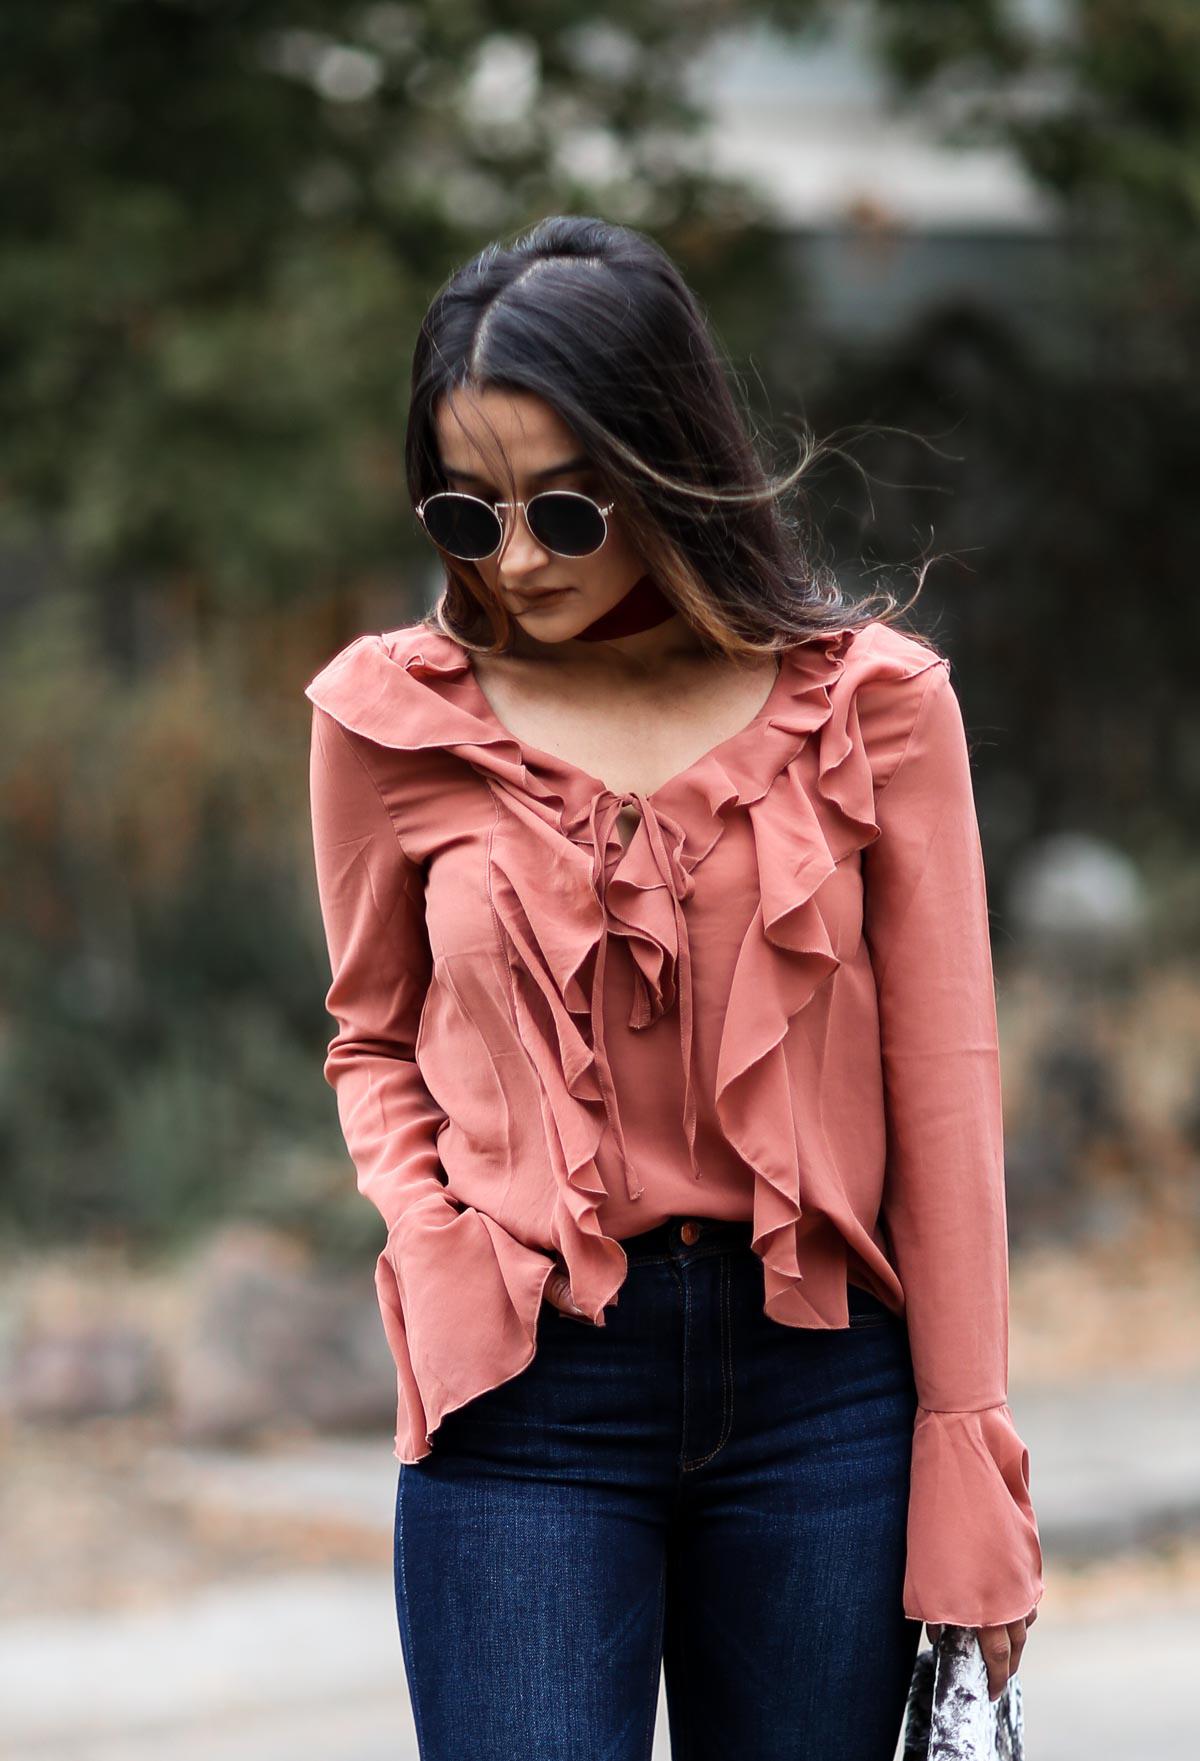 stiletto-confessions-forever21-ruffle-blouse-58